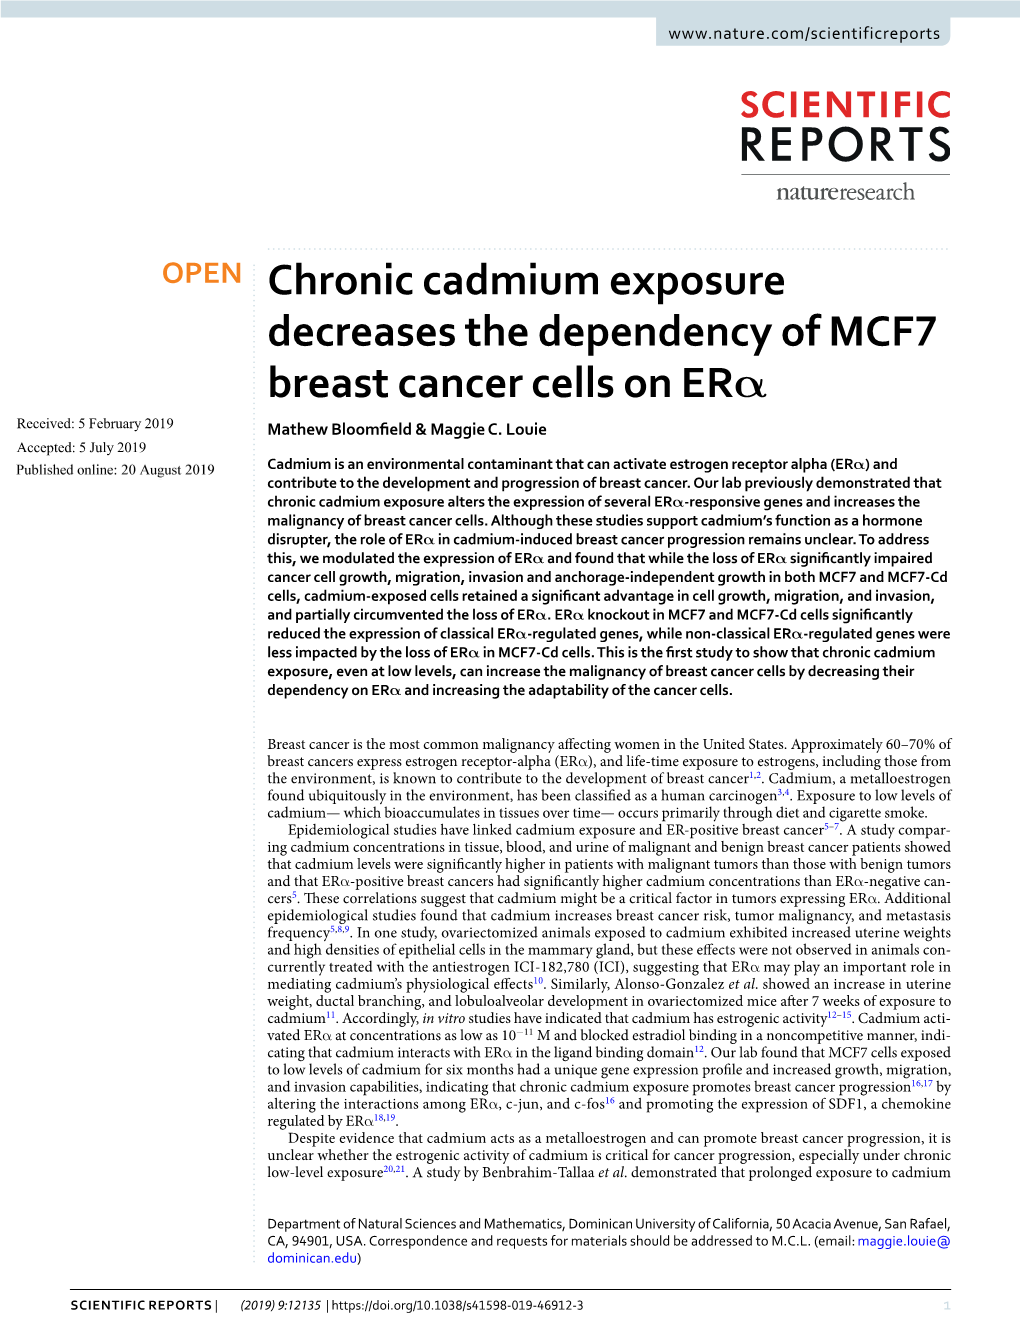 Chronic Cadmium Exposure Decreases the Dependency of MCF7 Breast Cancer Cells on Erα Received: 5 February 2019 Mathew Bloomfeld & Maggie C